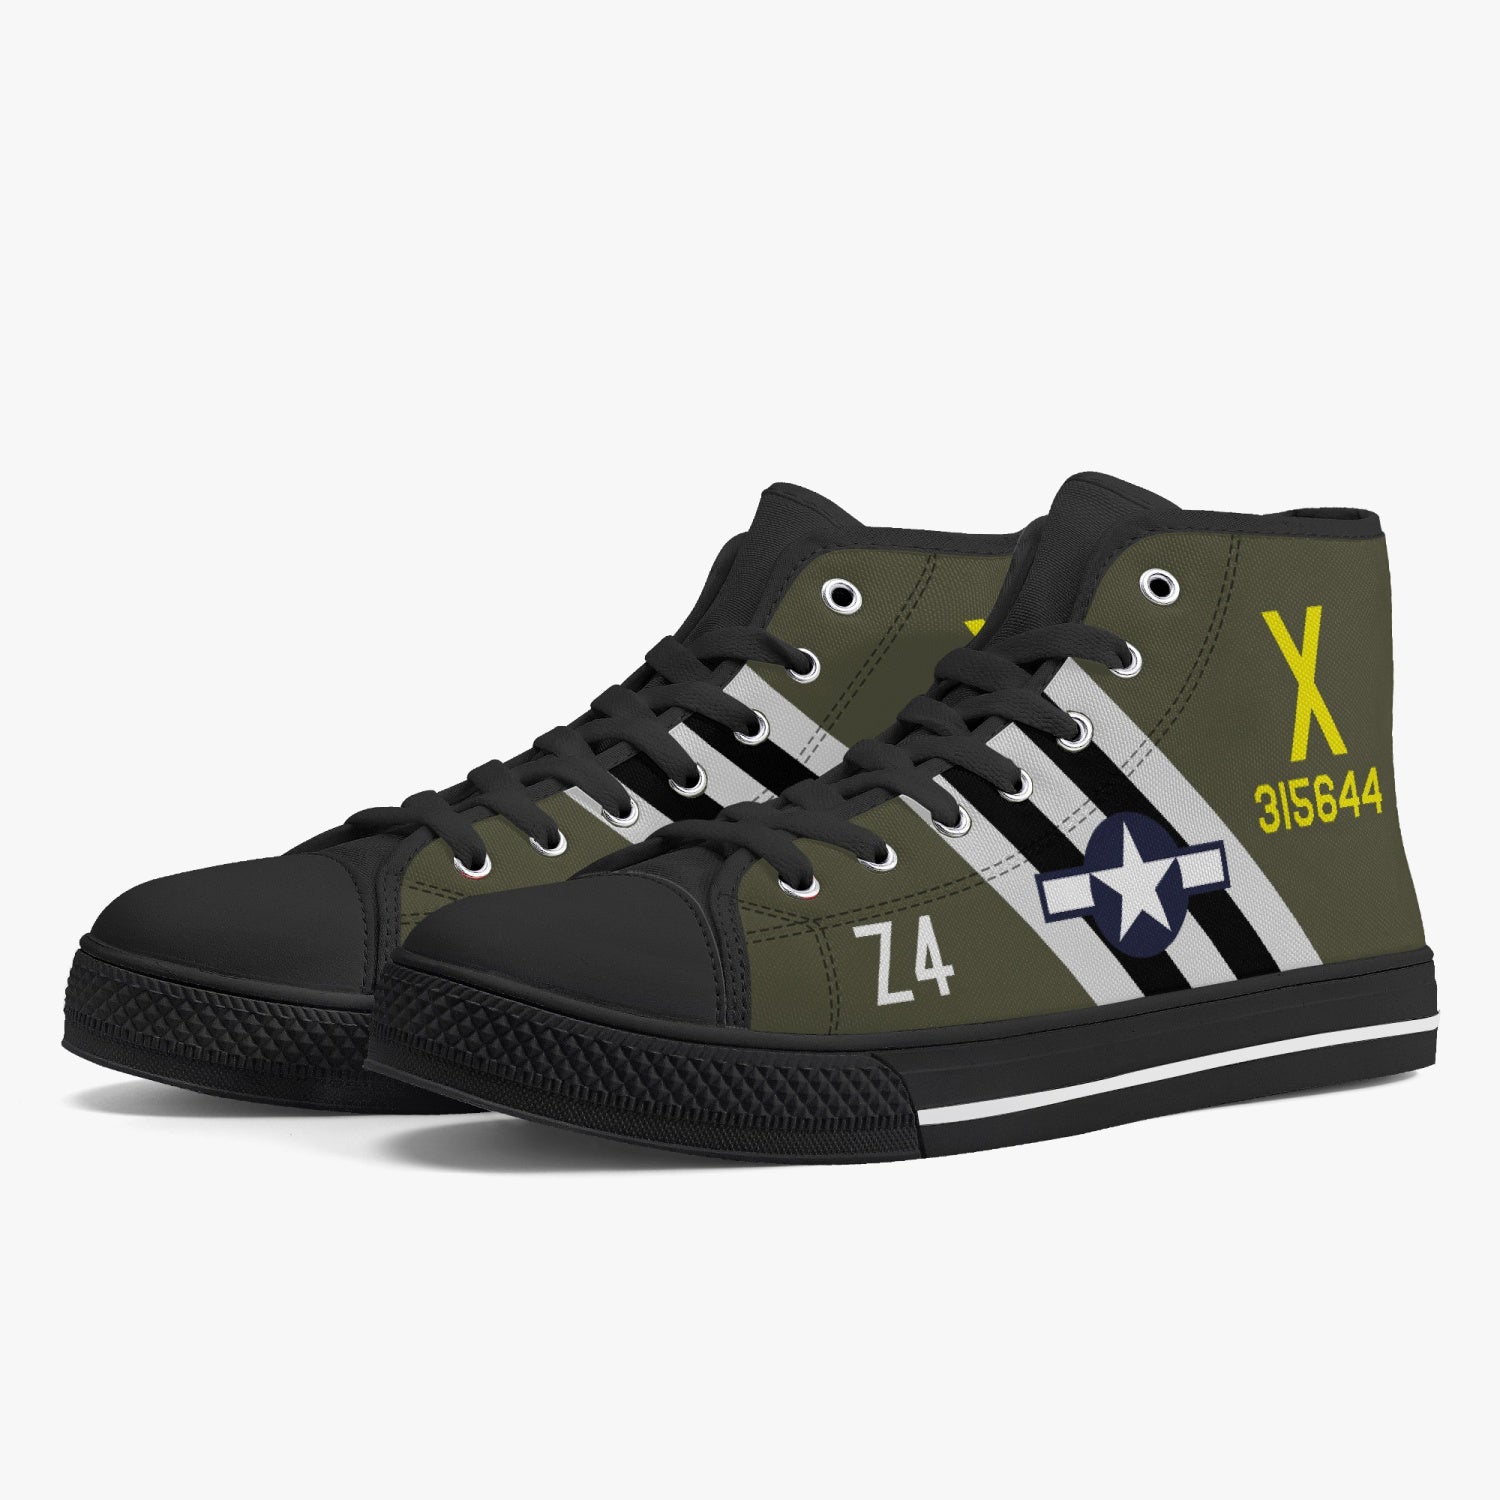 C-47 "Round Trip” High Top Canvas Shoes